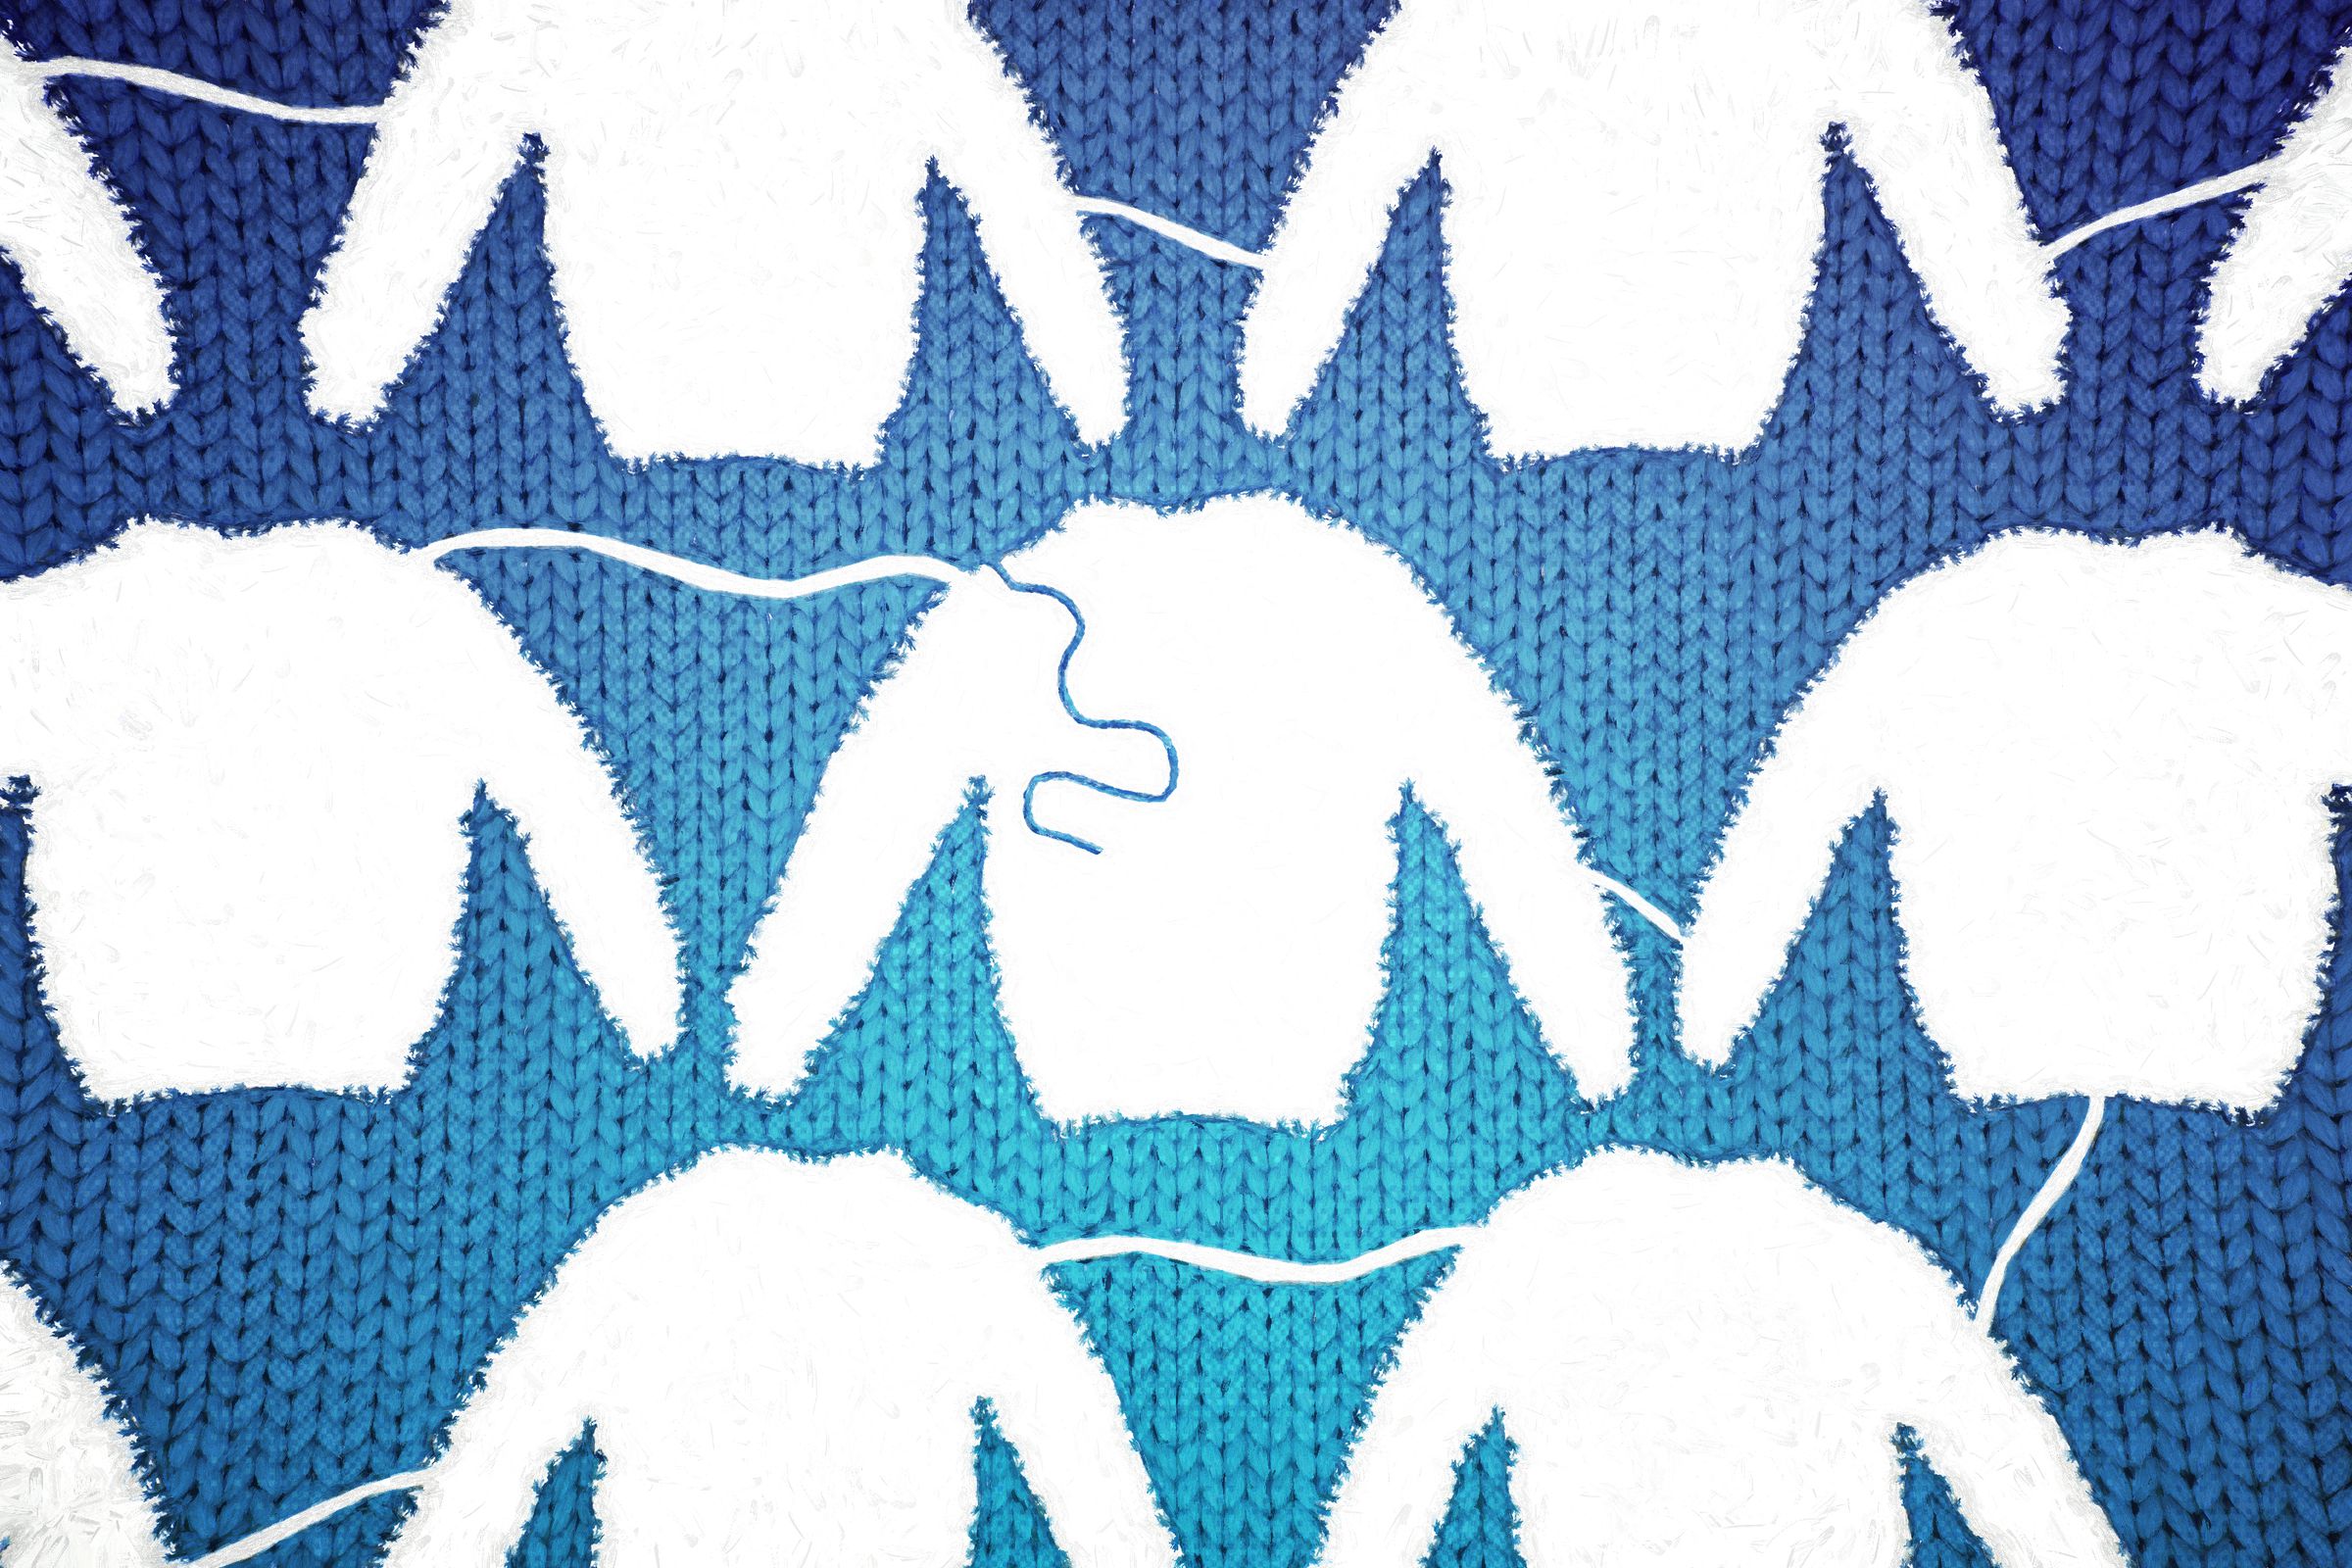 A graphic of white knitted sweaters on a blue yarn background, connected by threads.